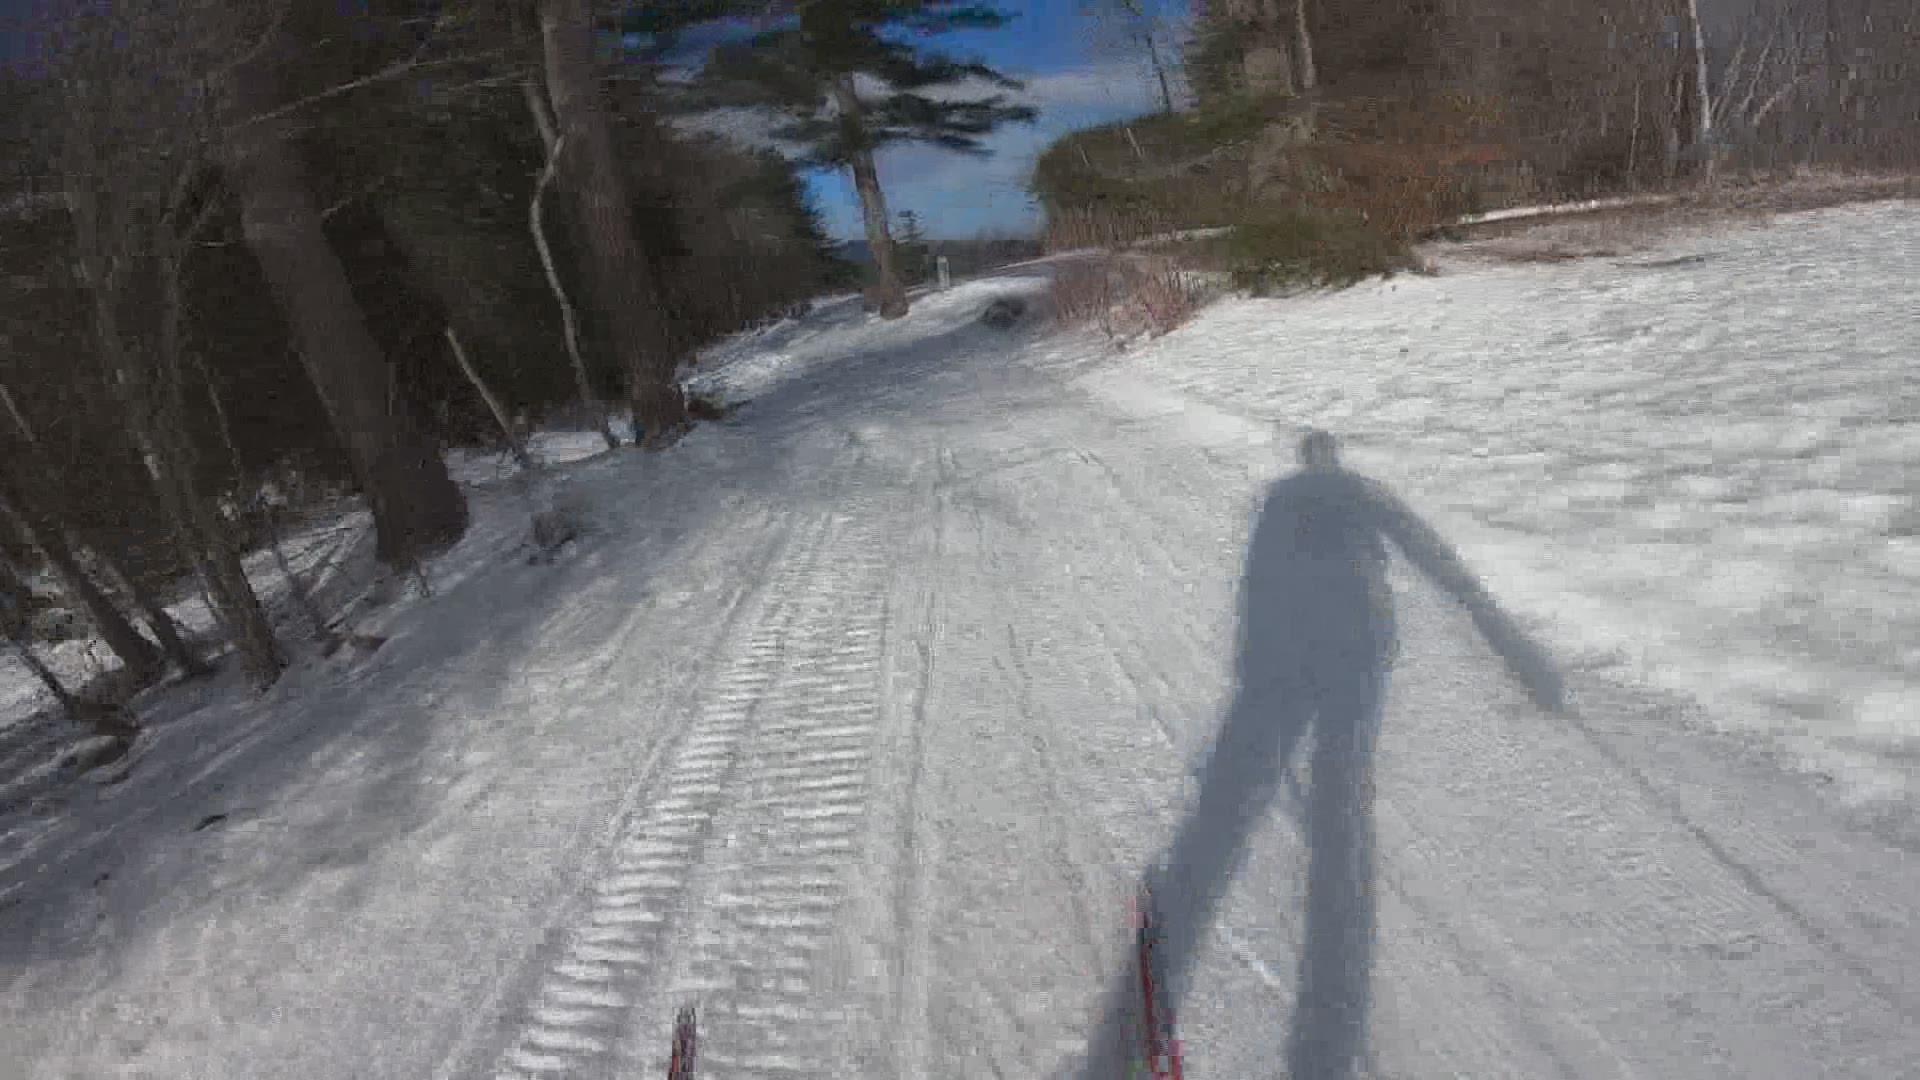 A great way to enjoy Maine outdoors in the winter is cross country skiing. Mallory Brooke checks out Carter’s Cross County Ski Center